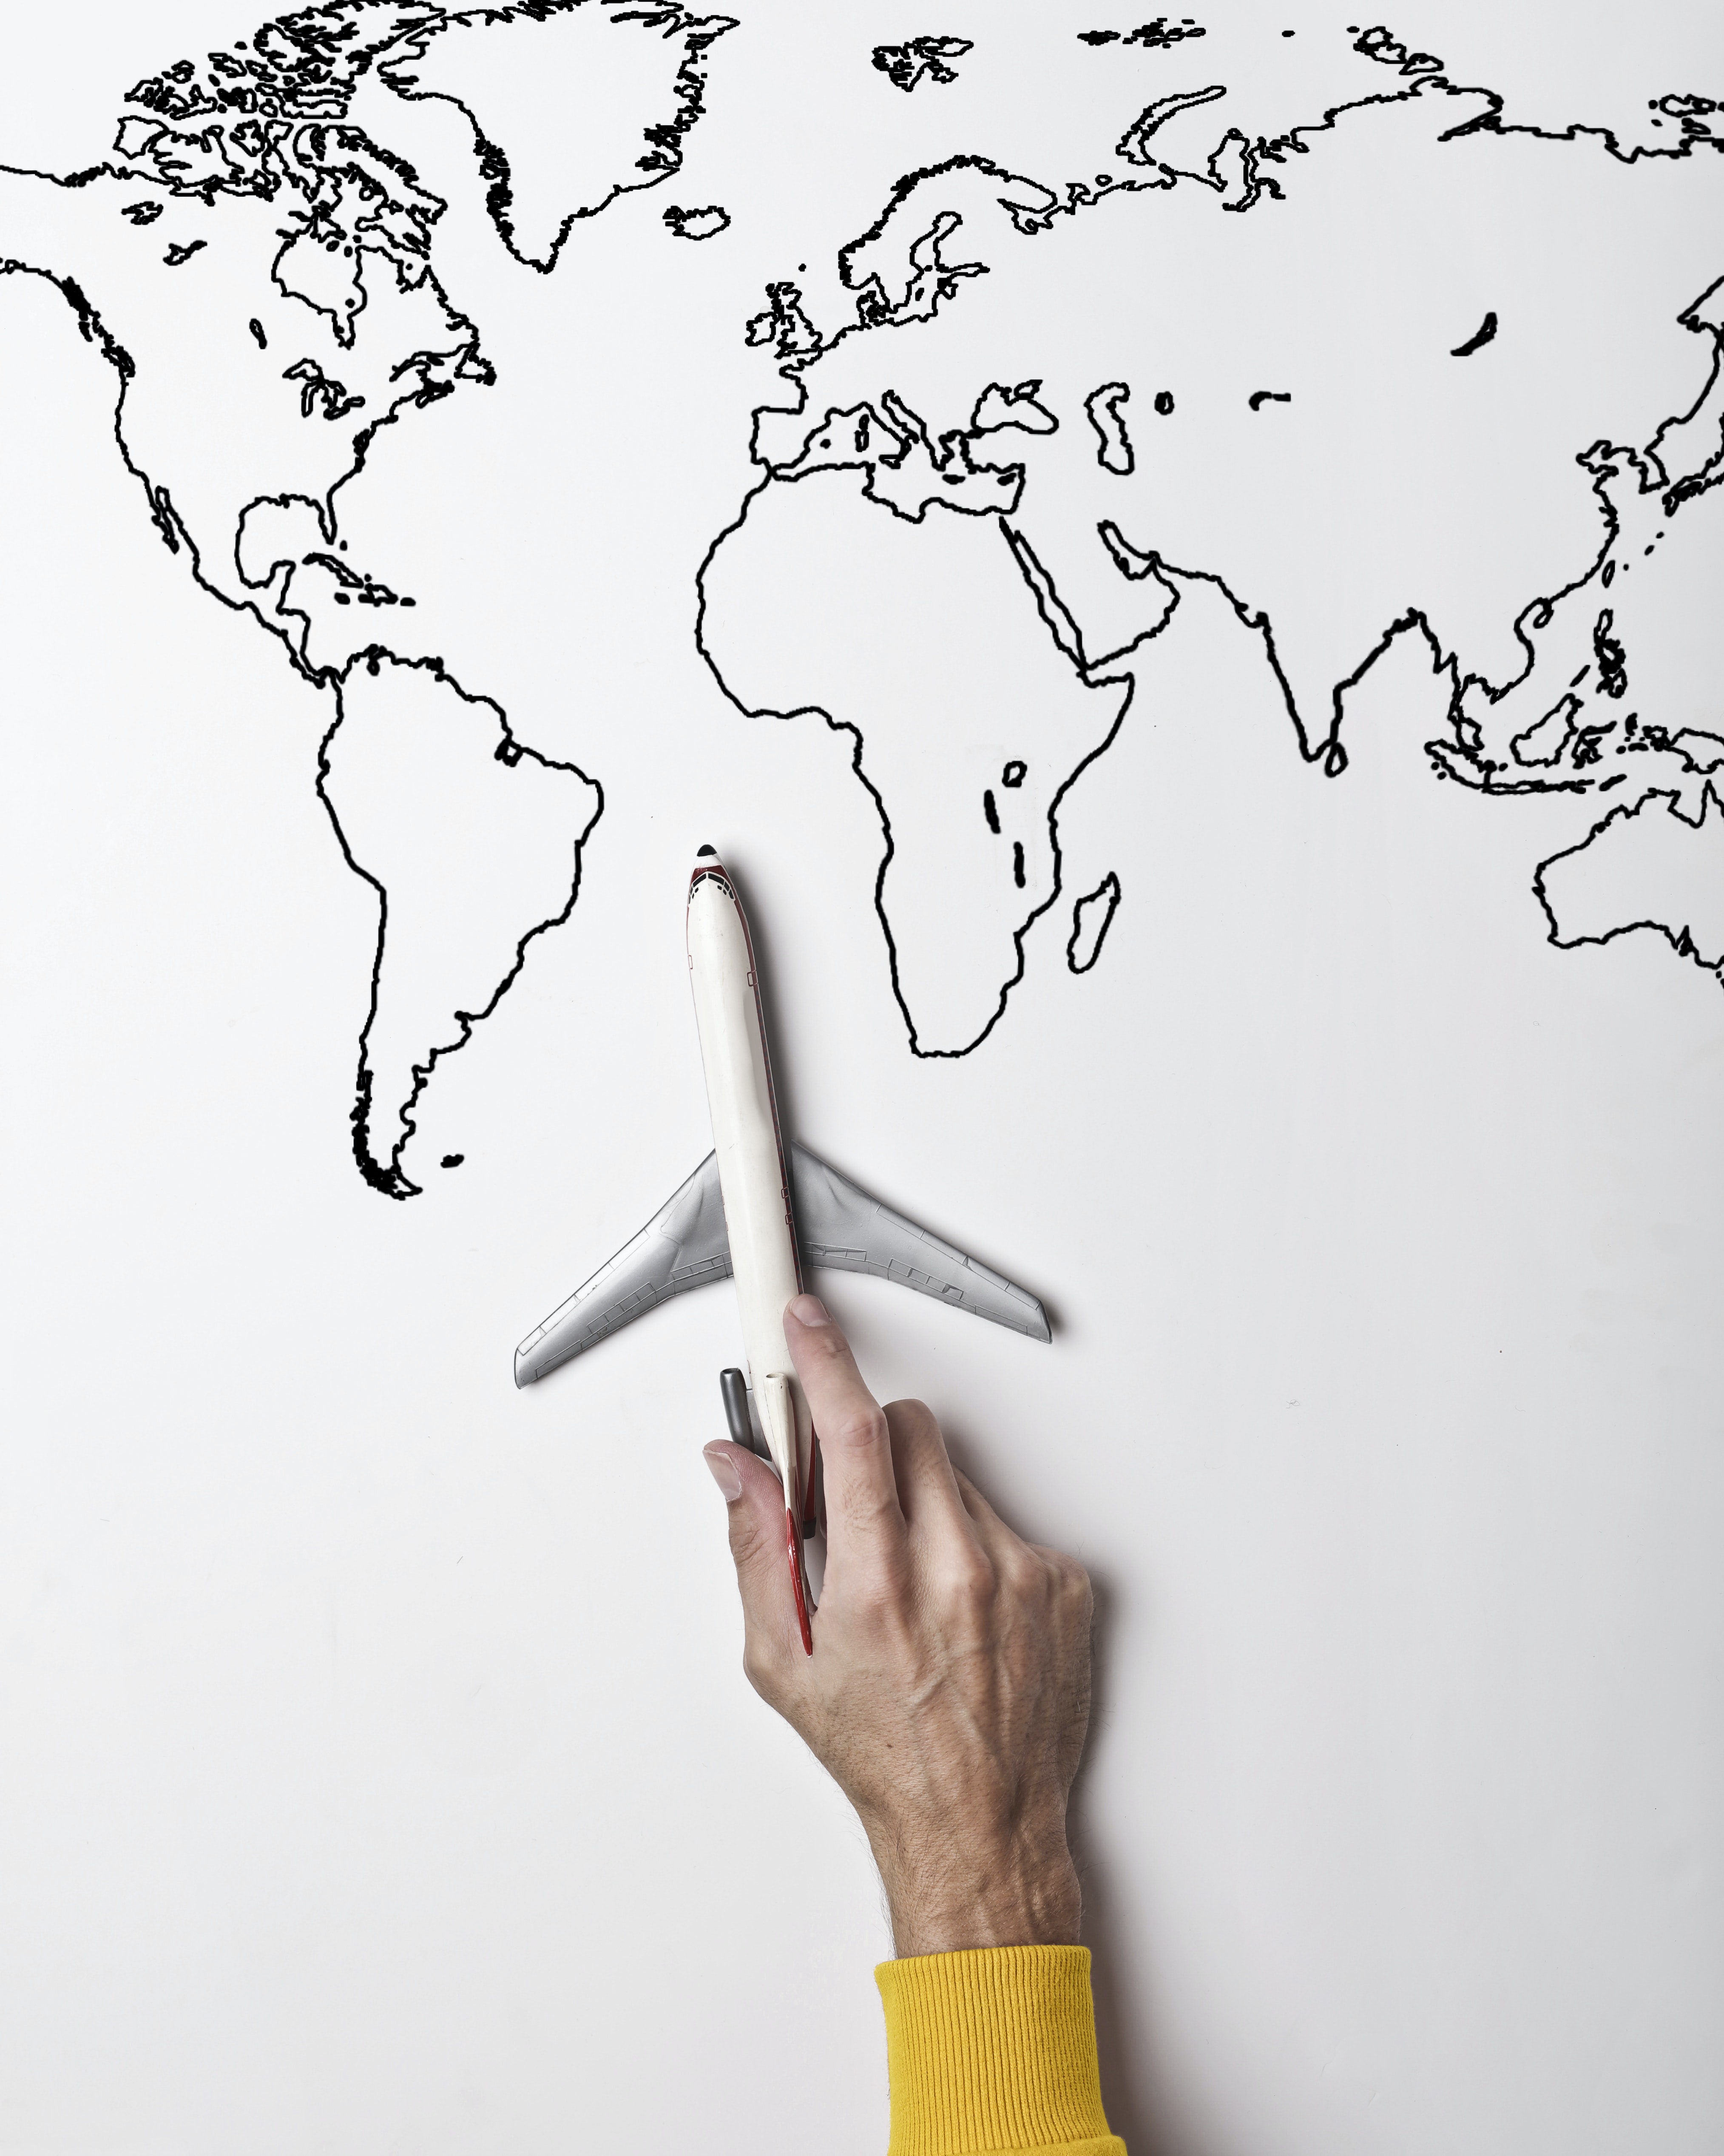 A toy plane held over a black and white world map